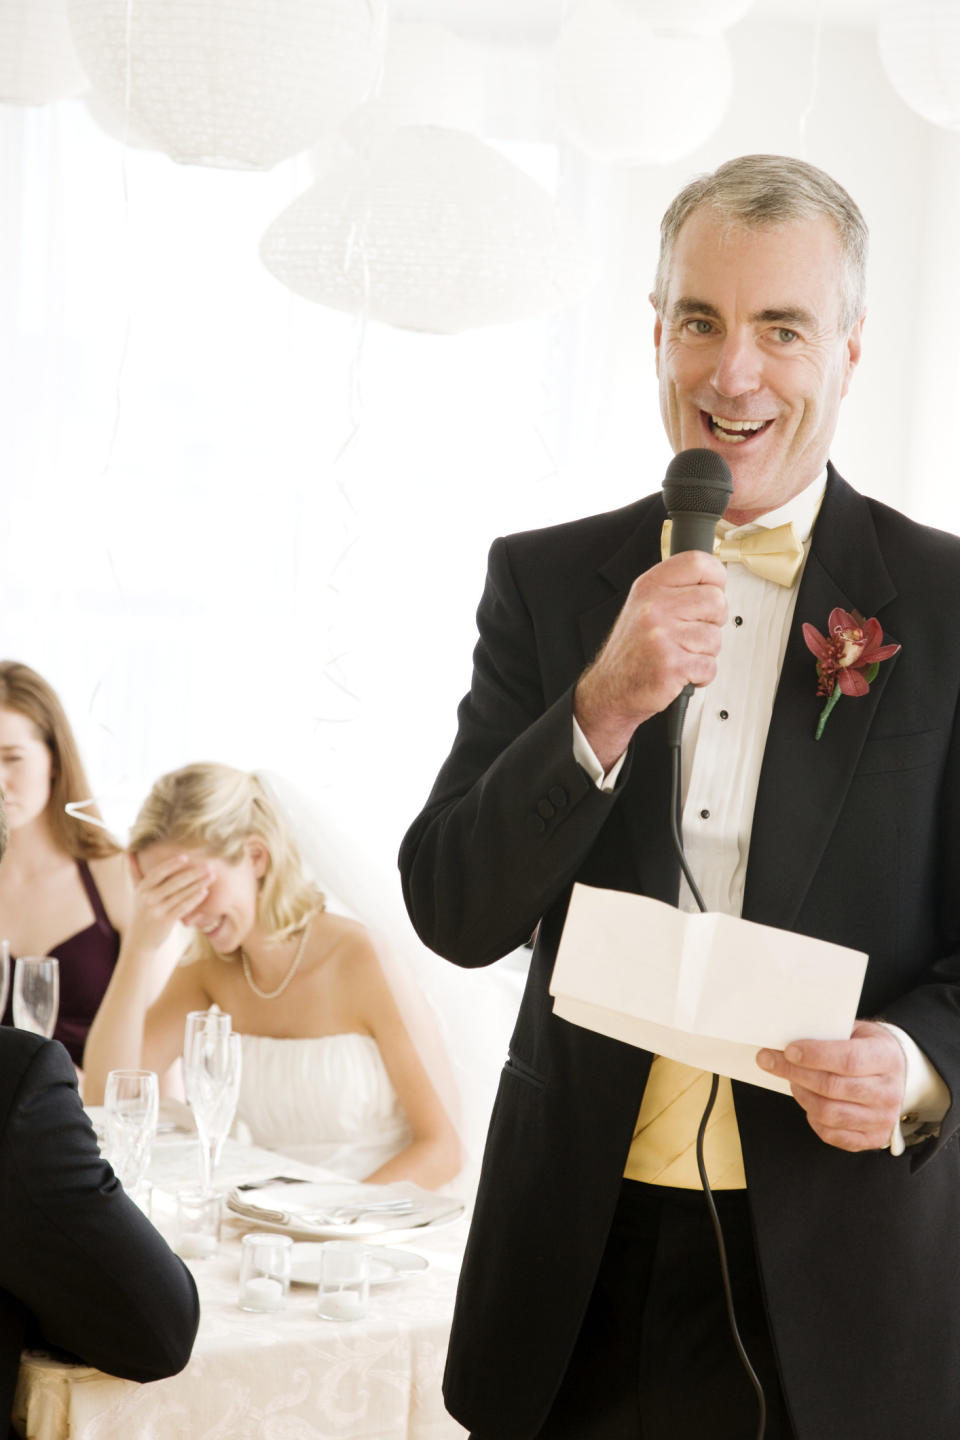 father giving a speech with bride behind him laughs with embarrassment